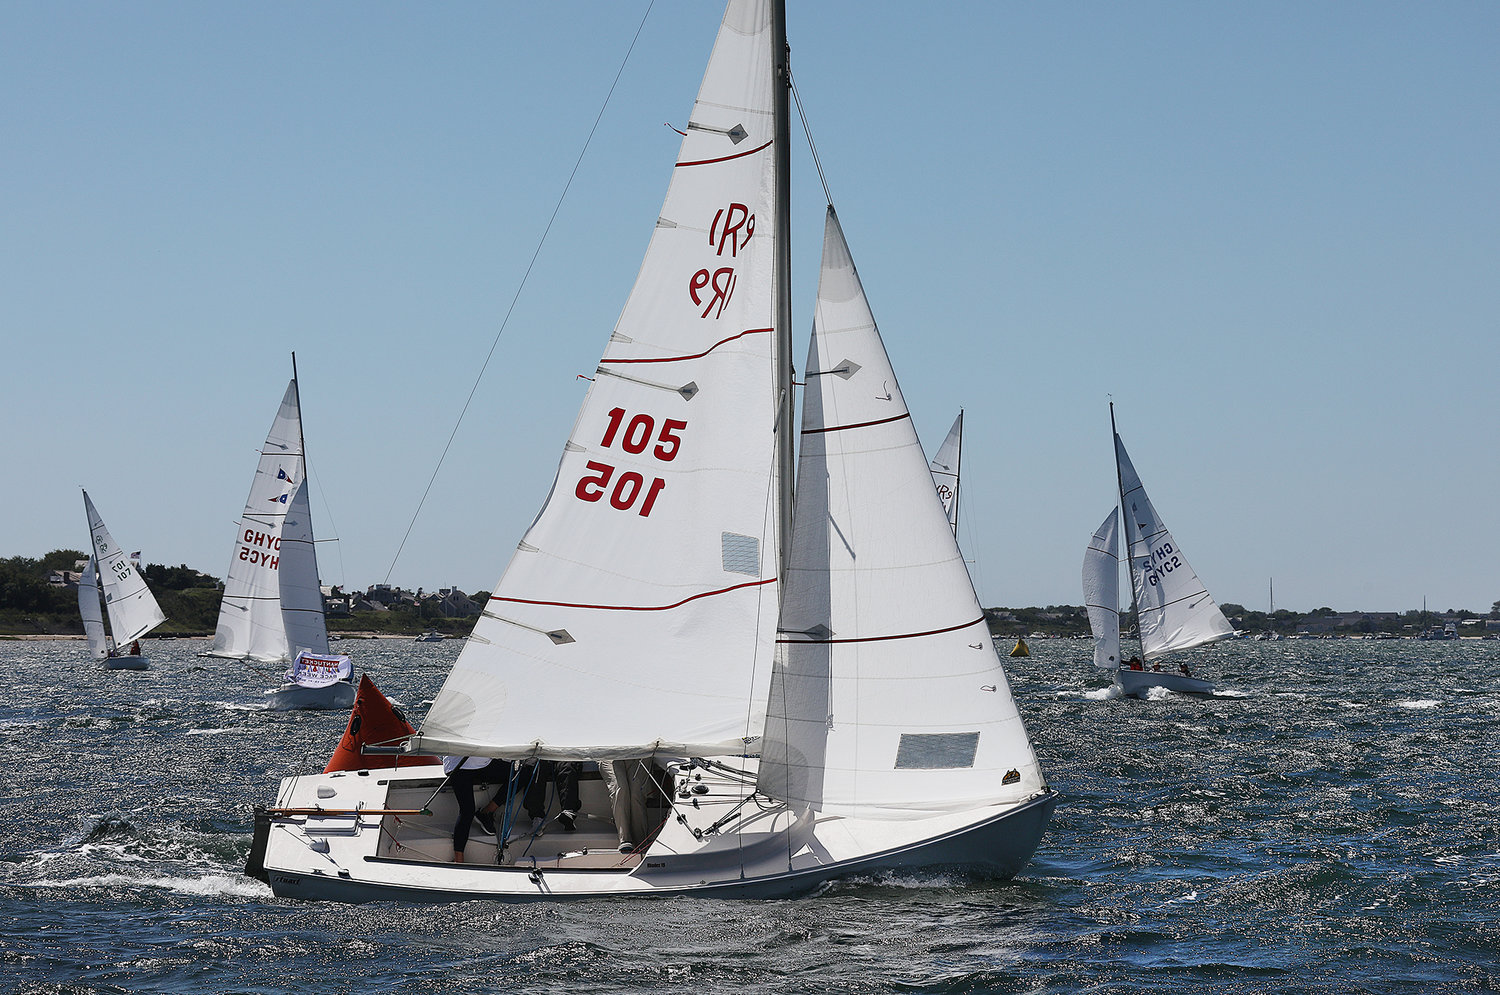 AUGUST 18, 2022 -- Nantucket Race Week. Day 6. Boats race during the Women's Regatta in the harbor on Thursday. Photo by Ray K. Saunders